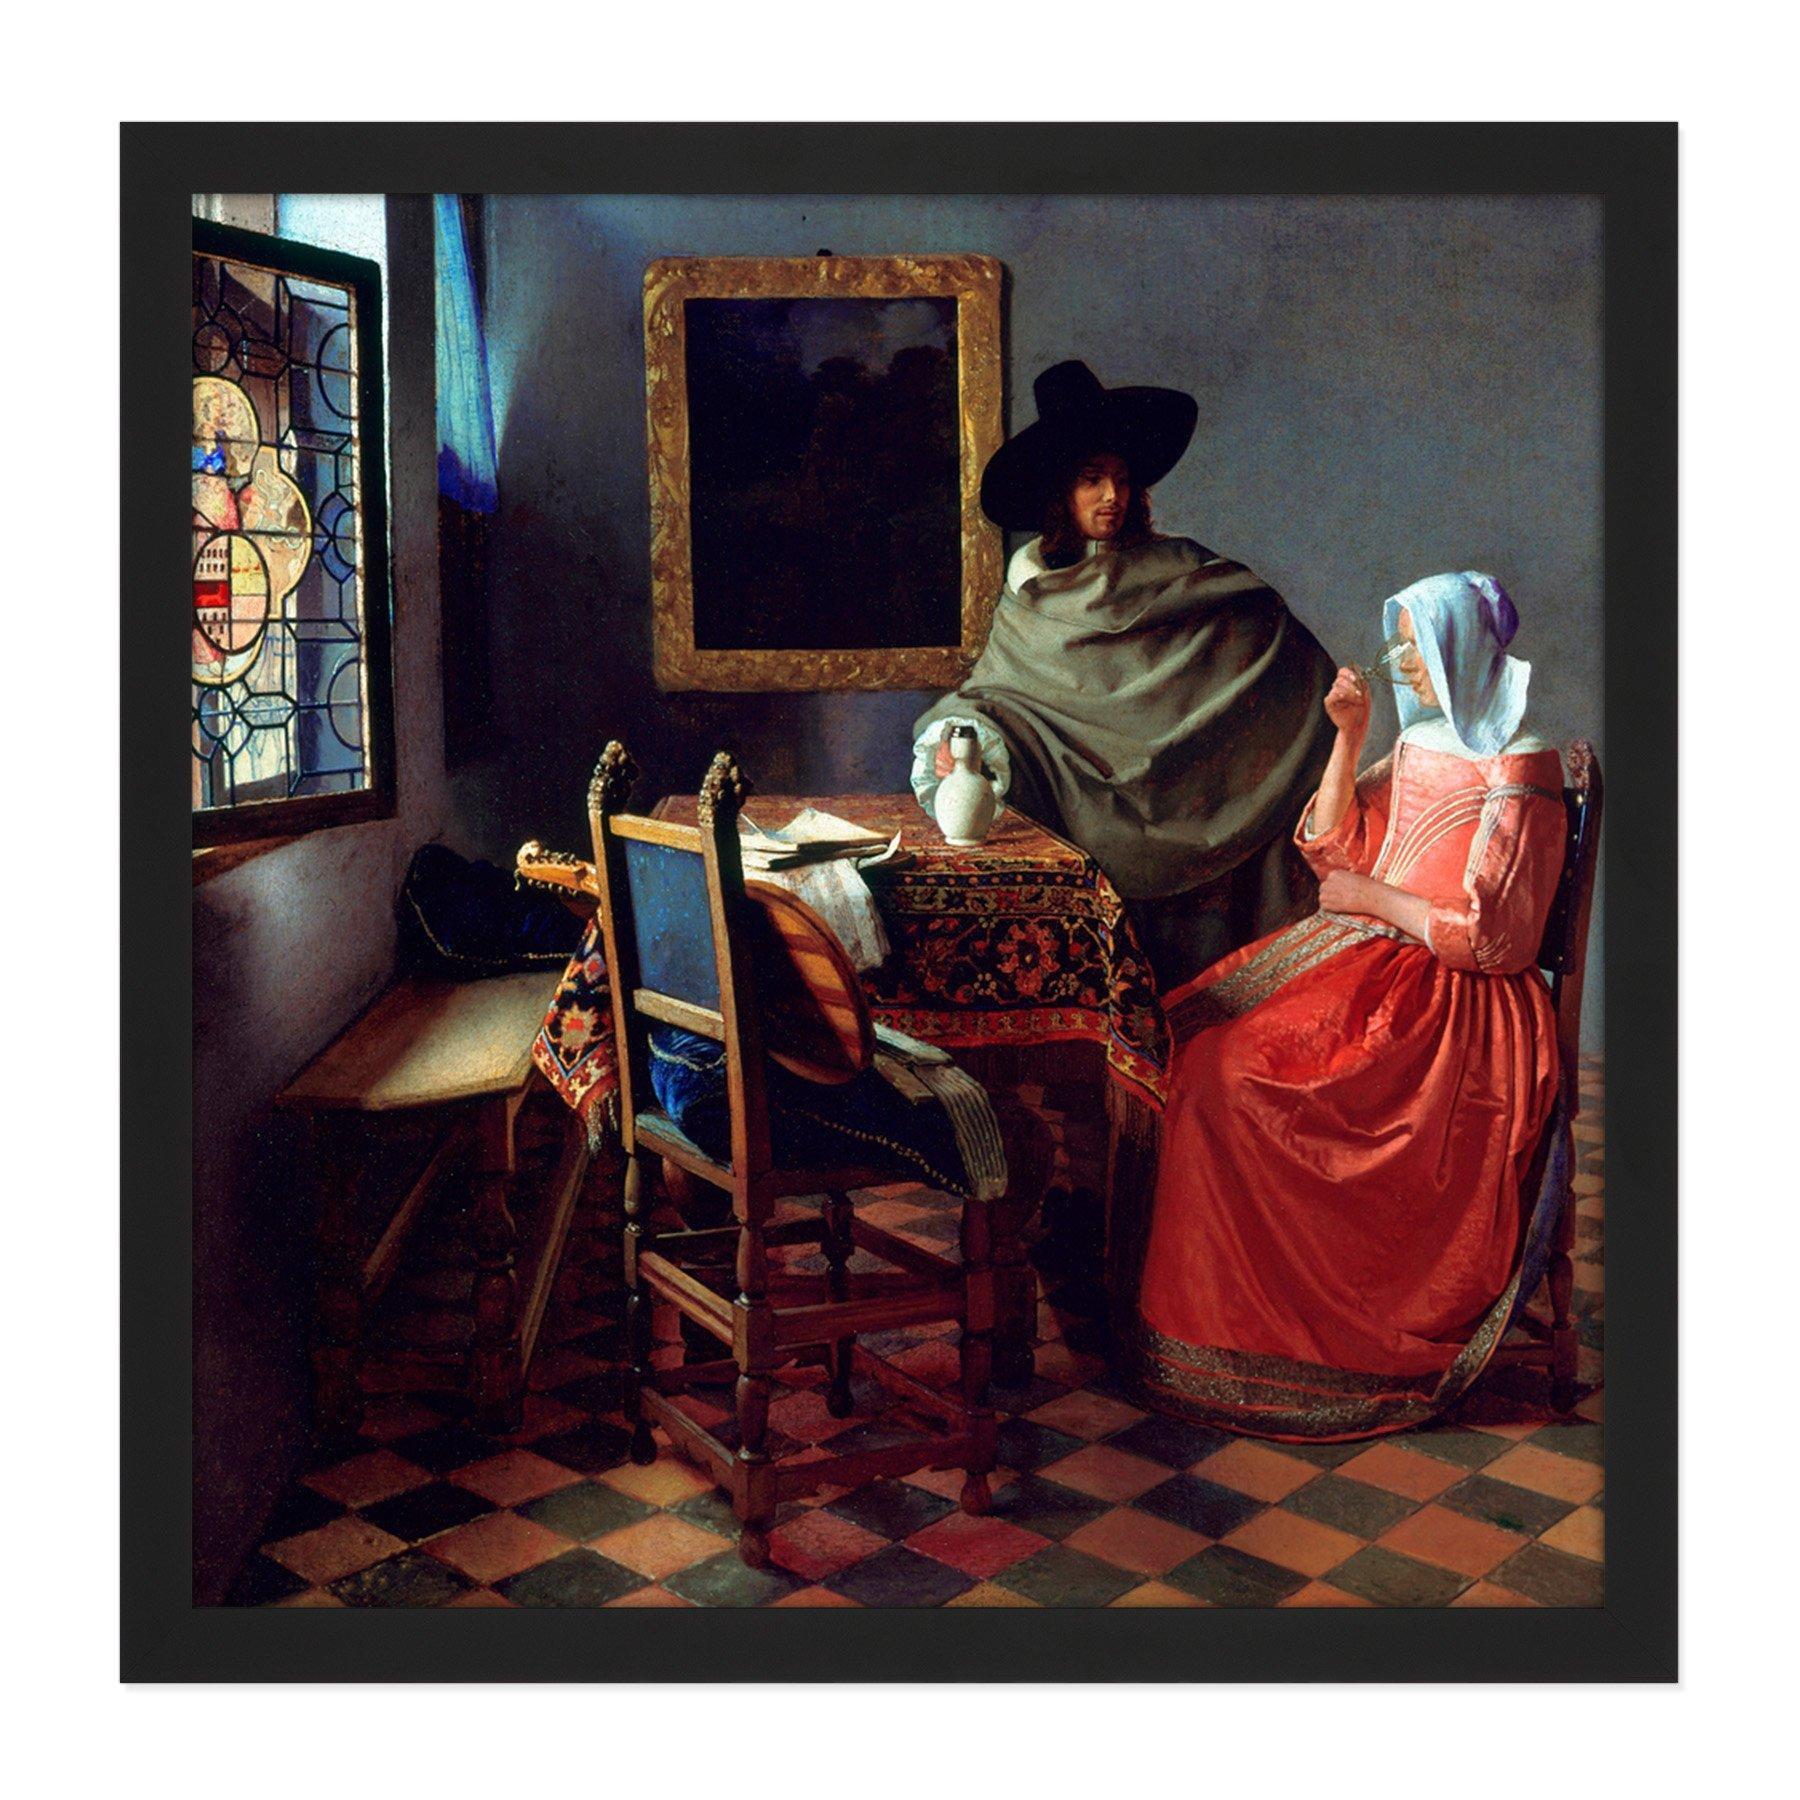 Jan Vermeer Van Delft The Glass Of Wine Square Framed Wall Art Print Picture 16X16 Inch - image 1